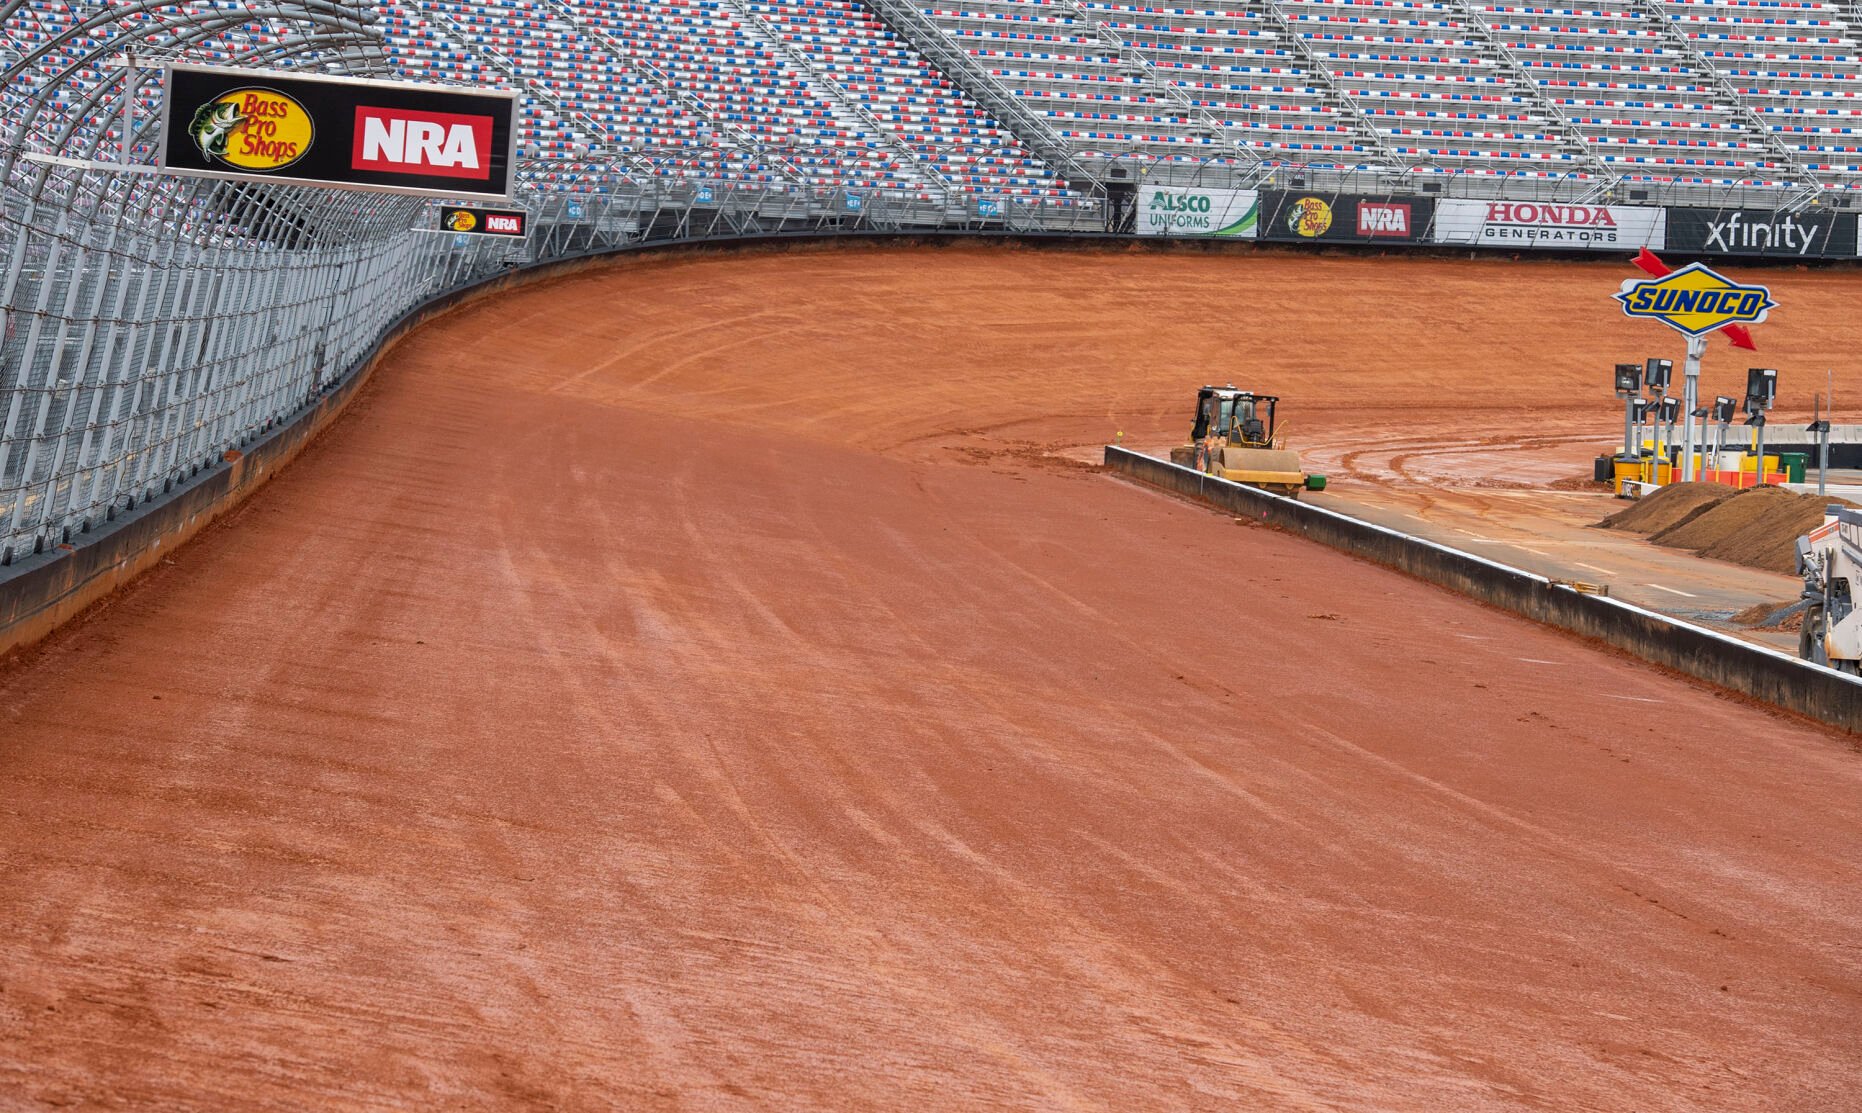 WATCH NOW BRISTOL DIRT RACE Excitement building in NASCAR circles for dirt track races in Bristol